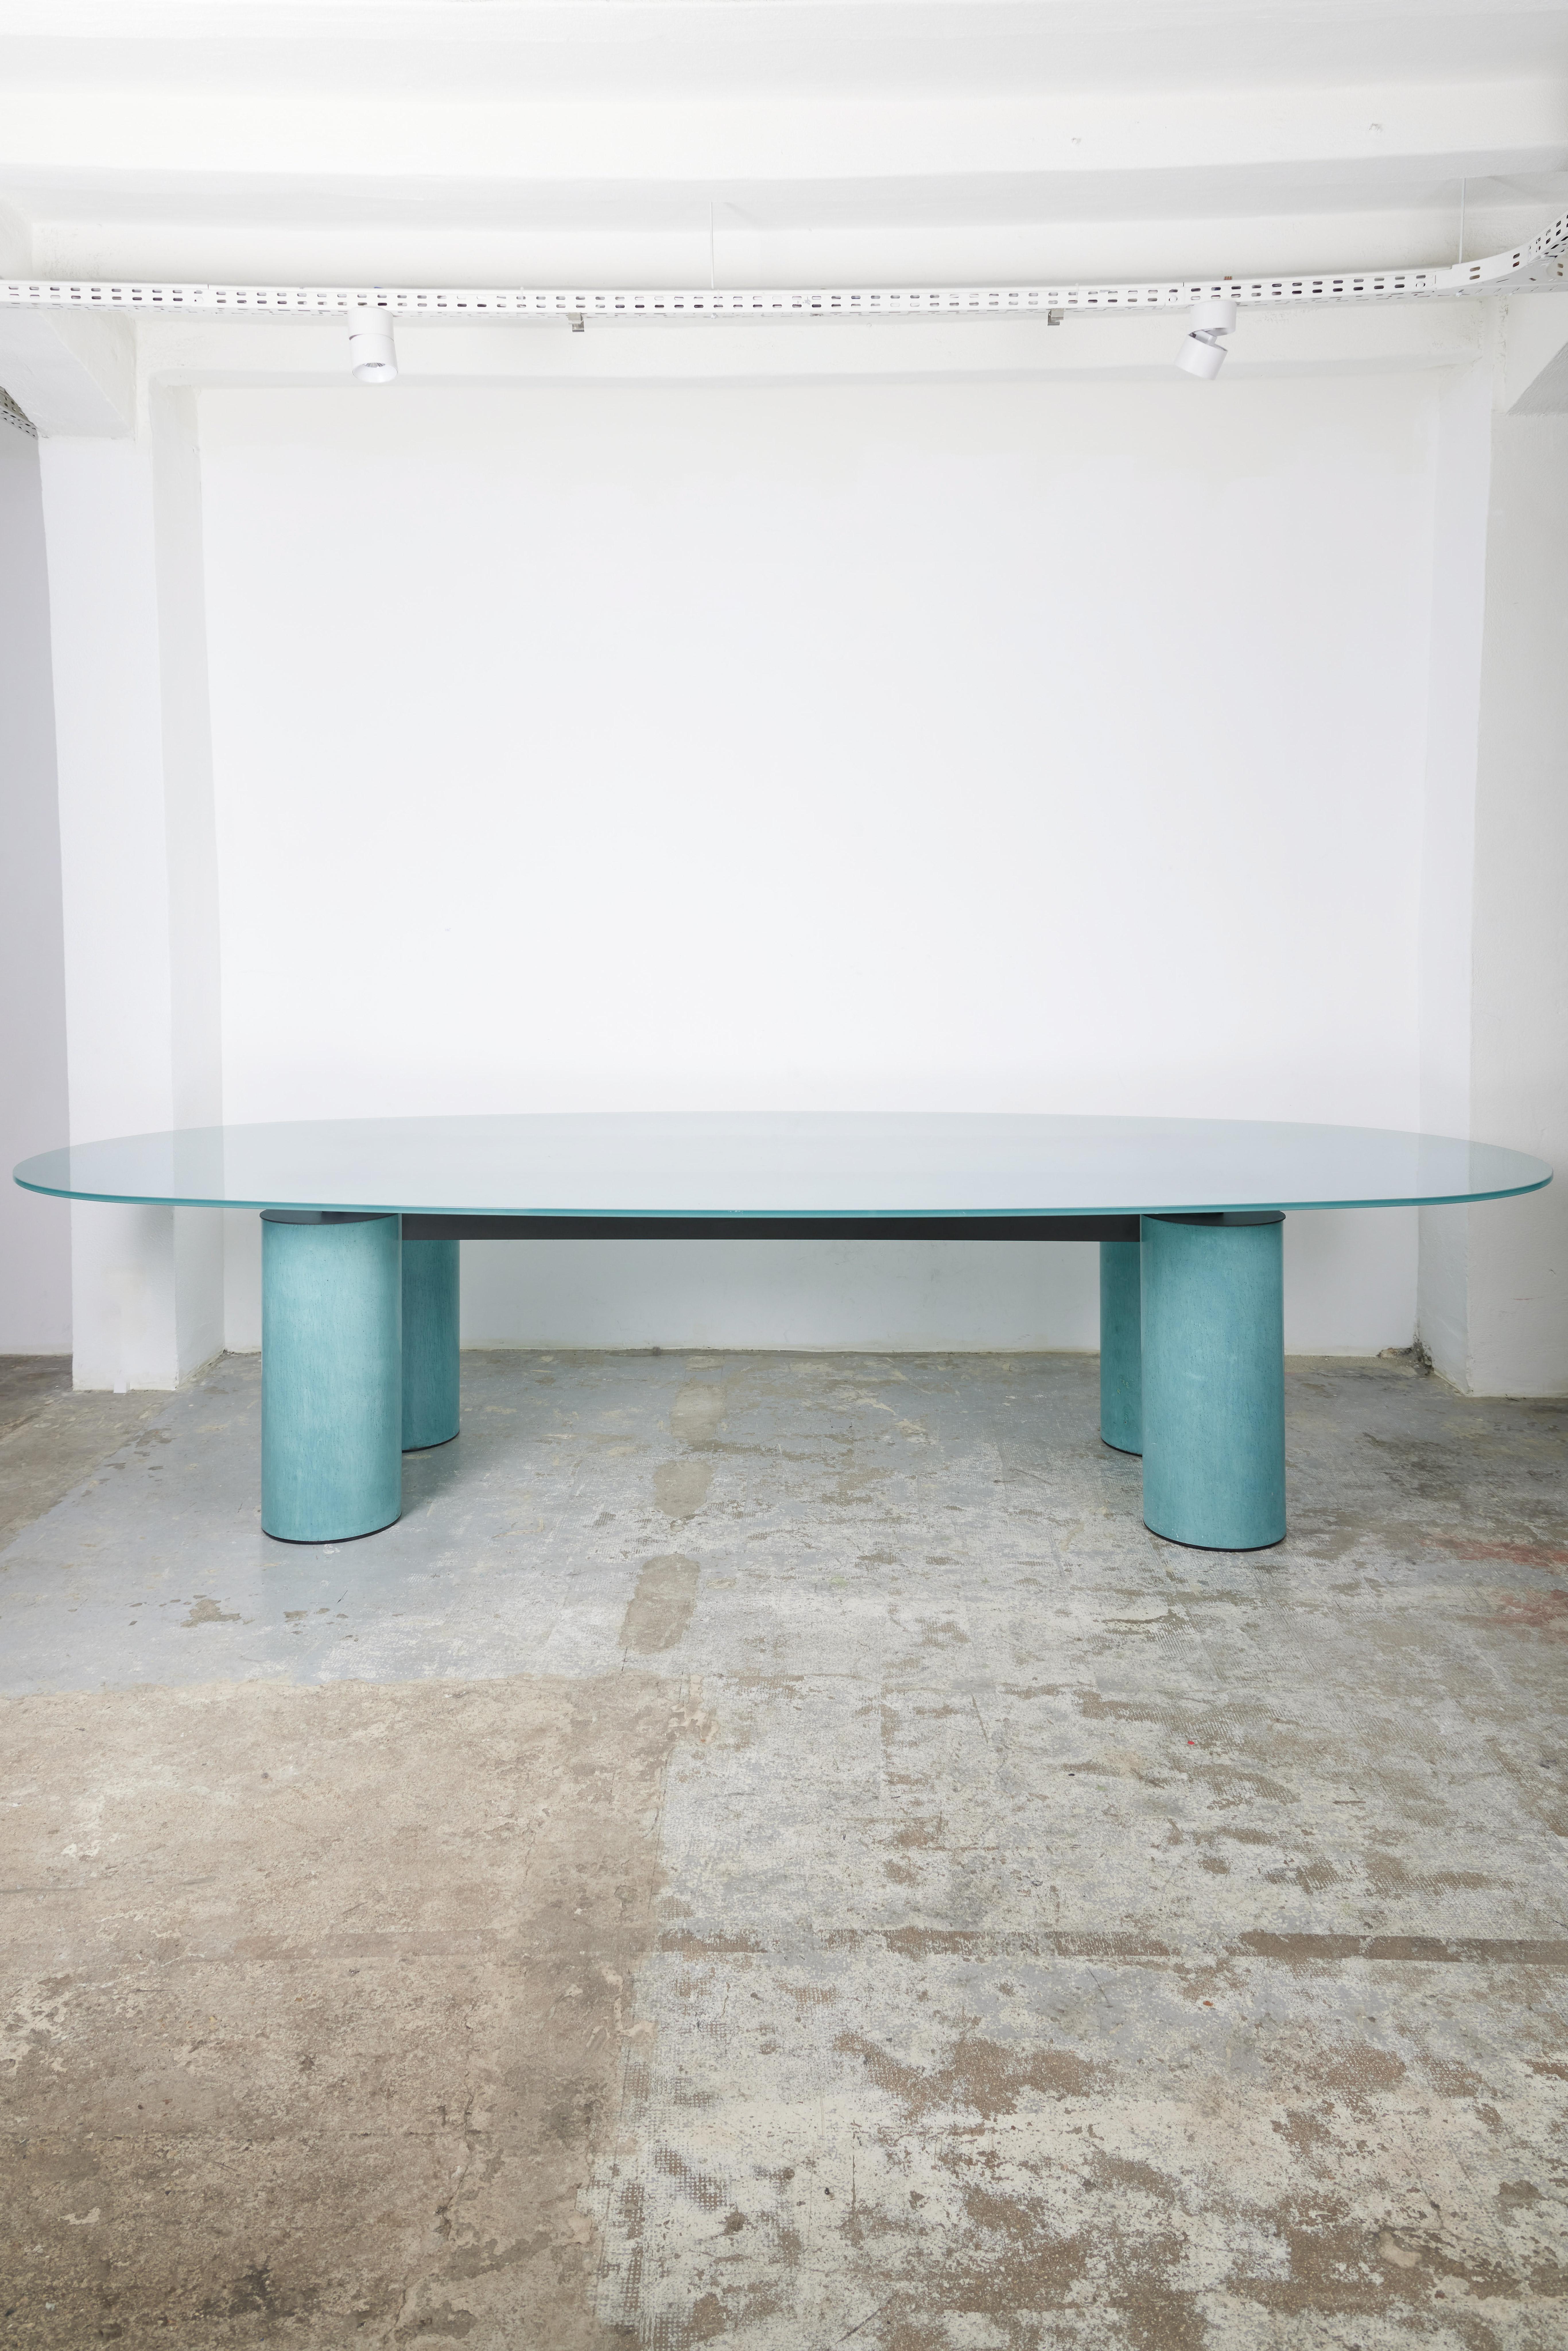 Large dining table Serenissimo by designers Lella (1934-2016) and Massimo Vignelli (1931-2014), produced by Acerbis in the 1970s. The oval tabletop is made of glass, supported by four green lacquered metal legs. Good condition.